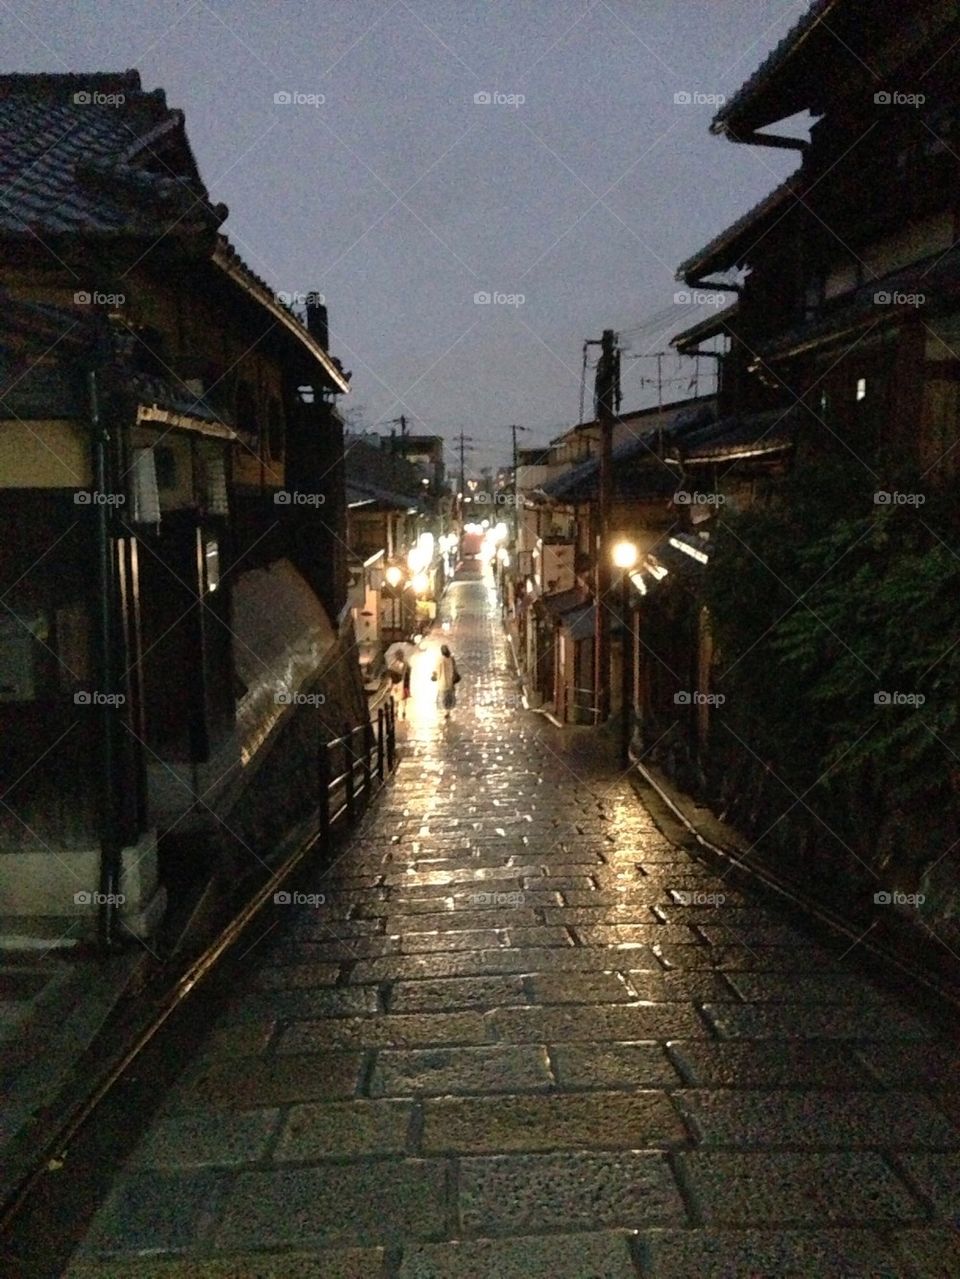 Late night in Kyoto